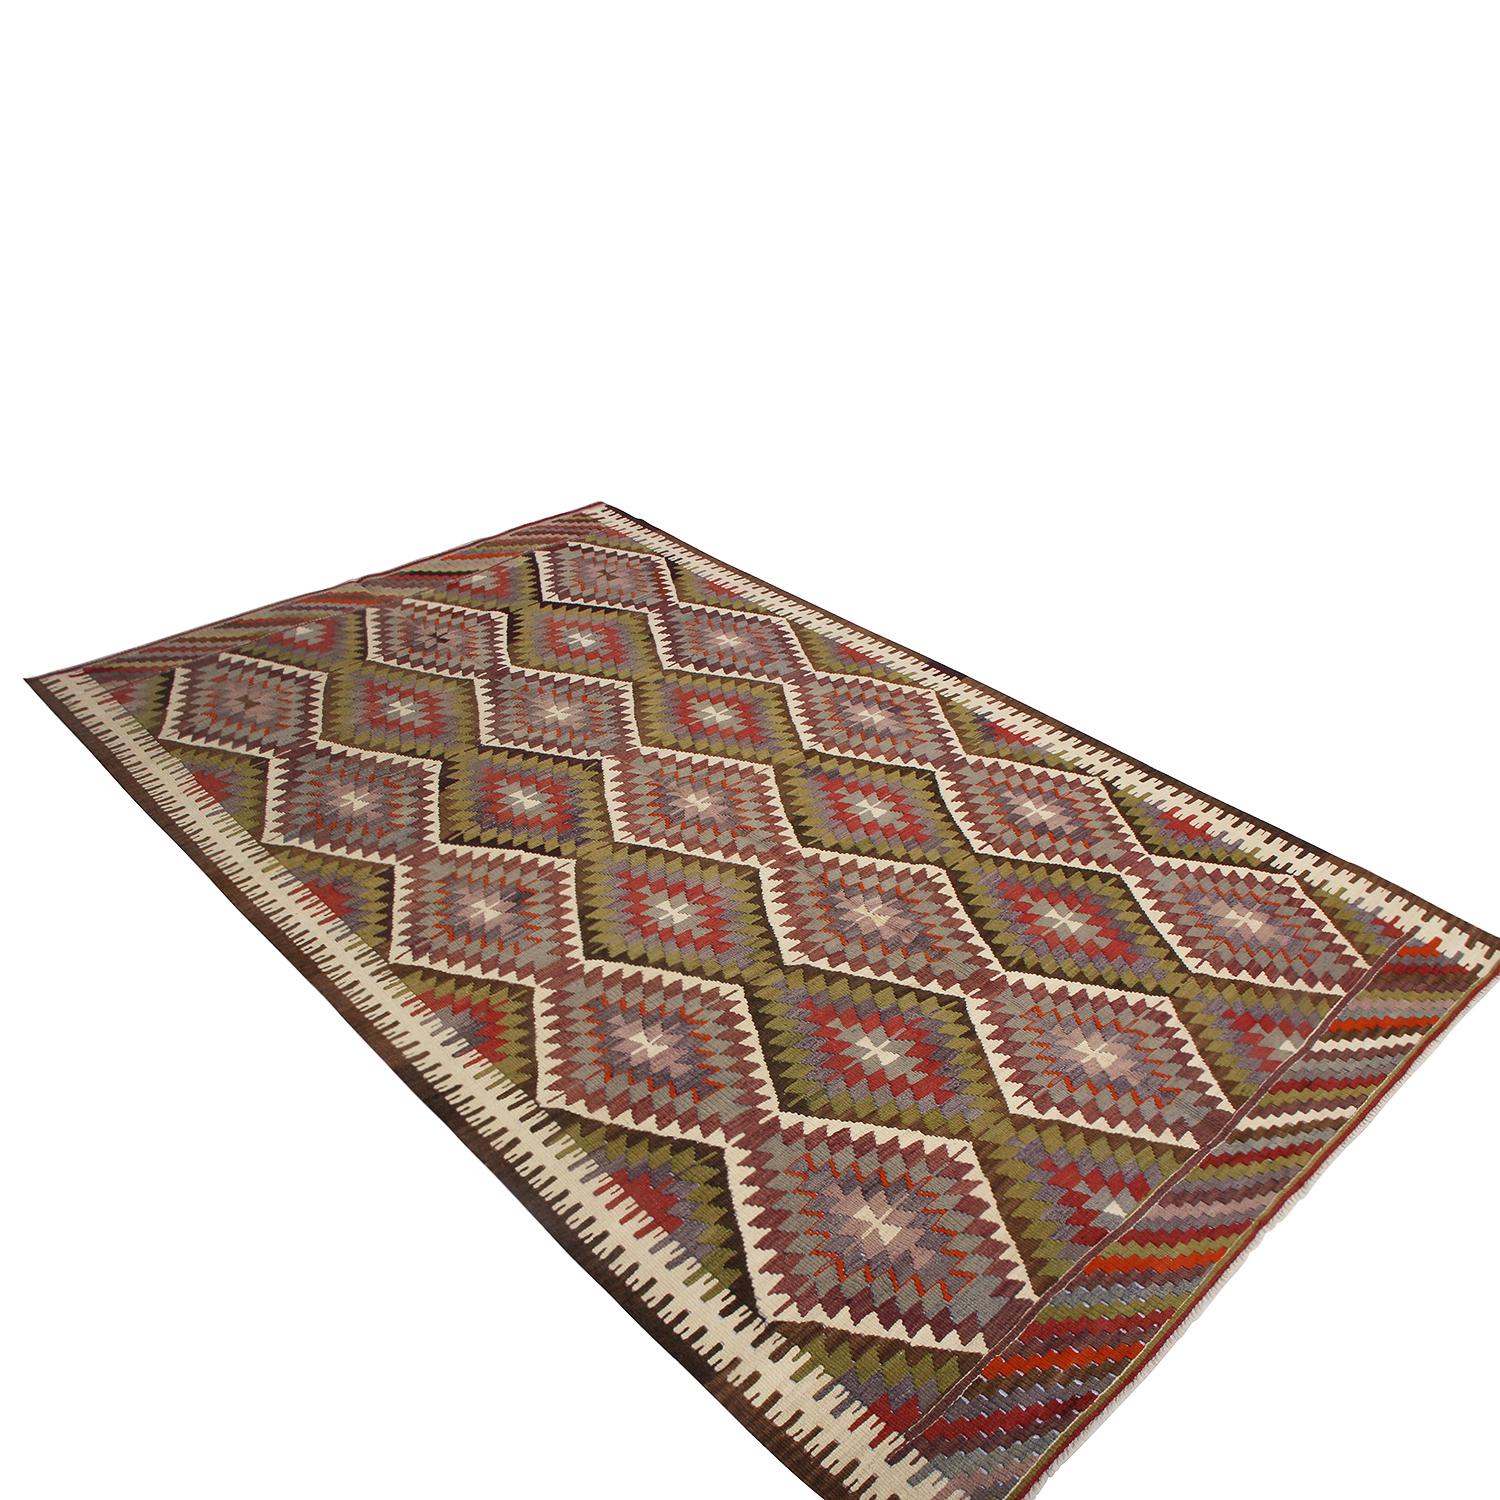 Flat-woven in Turkey originating between 1950-1960, this vintage midcentury wool Kilim hails from the city of Antalya, hosting one of the more uncommon, individualistic arrays of colorways among its era balancing an accenting presence of rich red